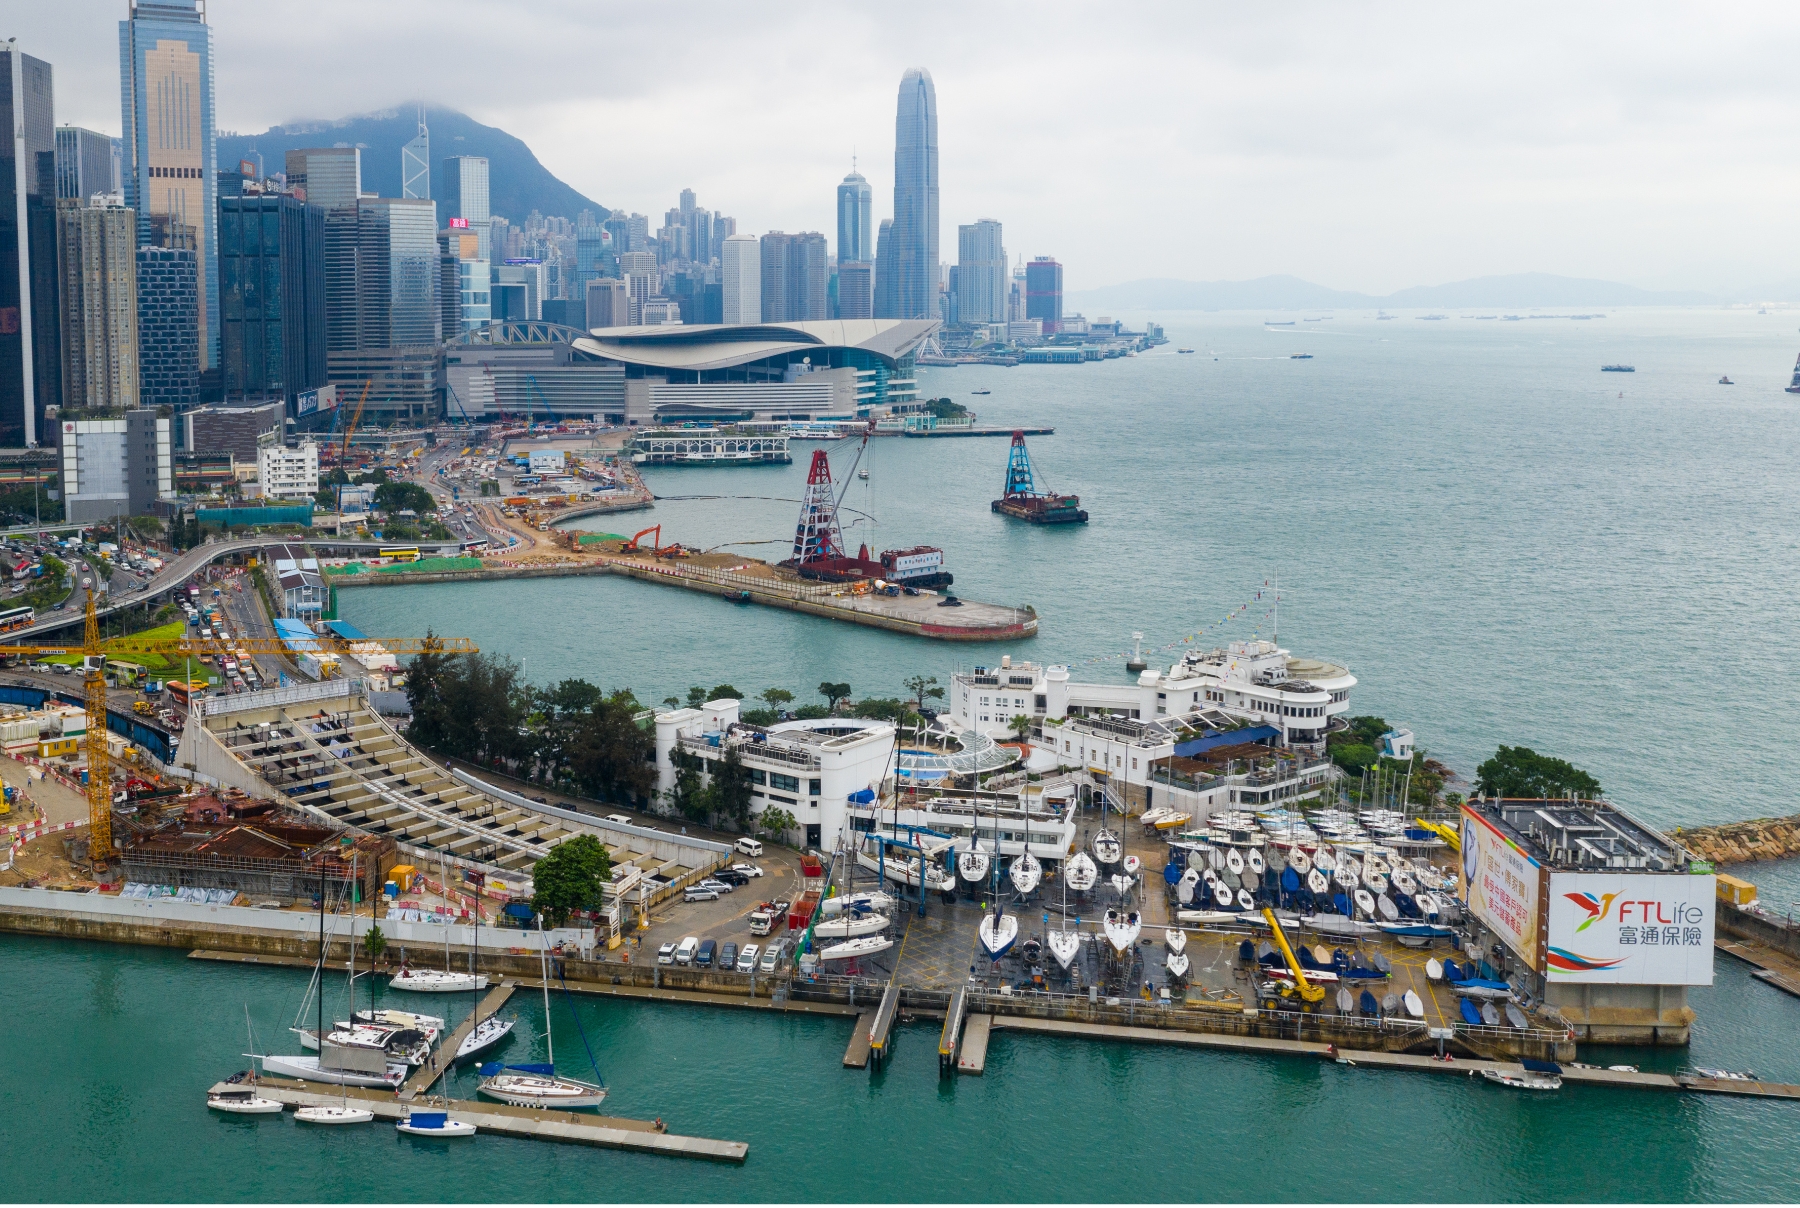 A view of the Royal Hong Kong Yacht Club in the foreground and the Hong Kong Convention and Exhibition Centre in the background.